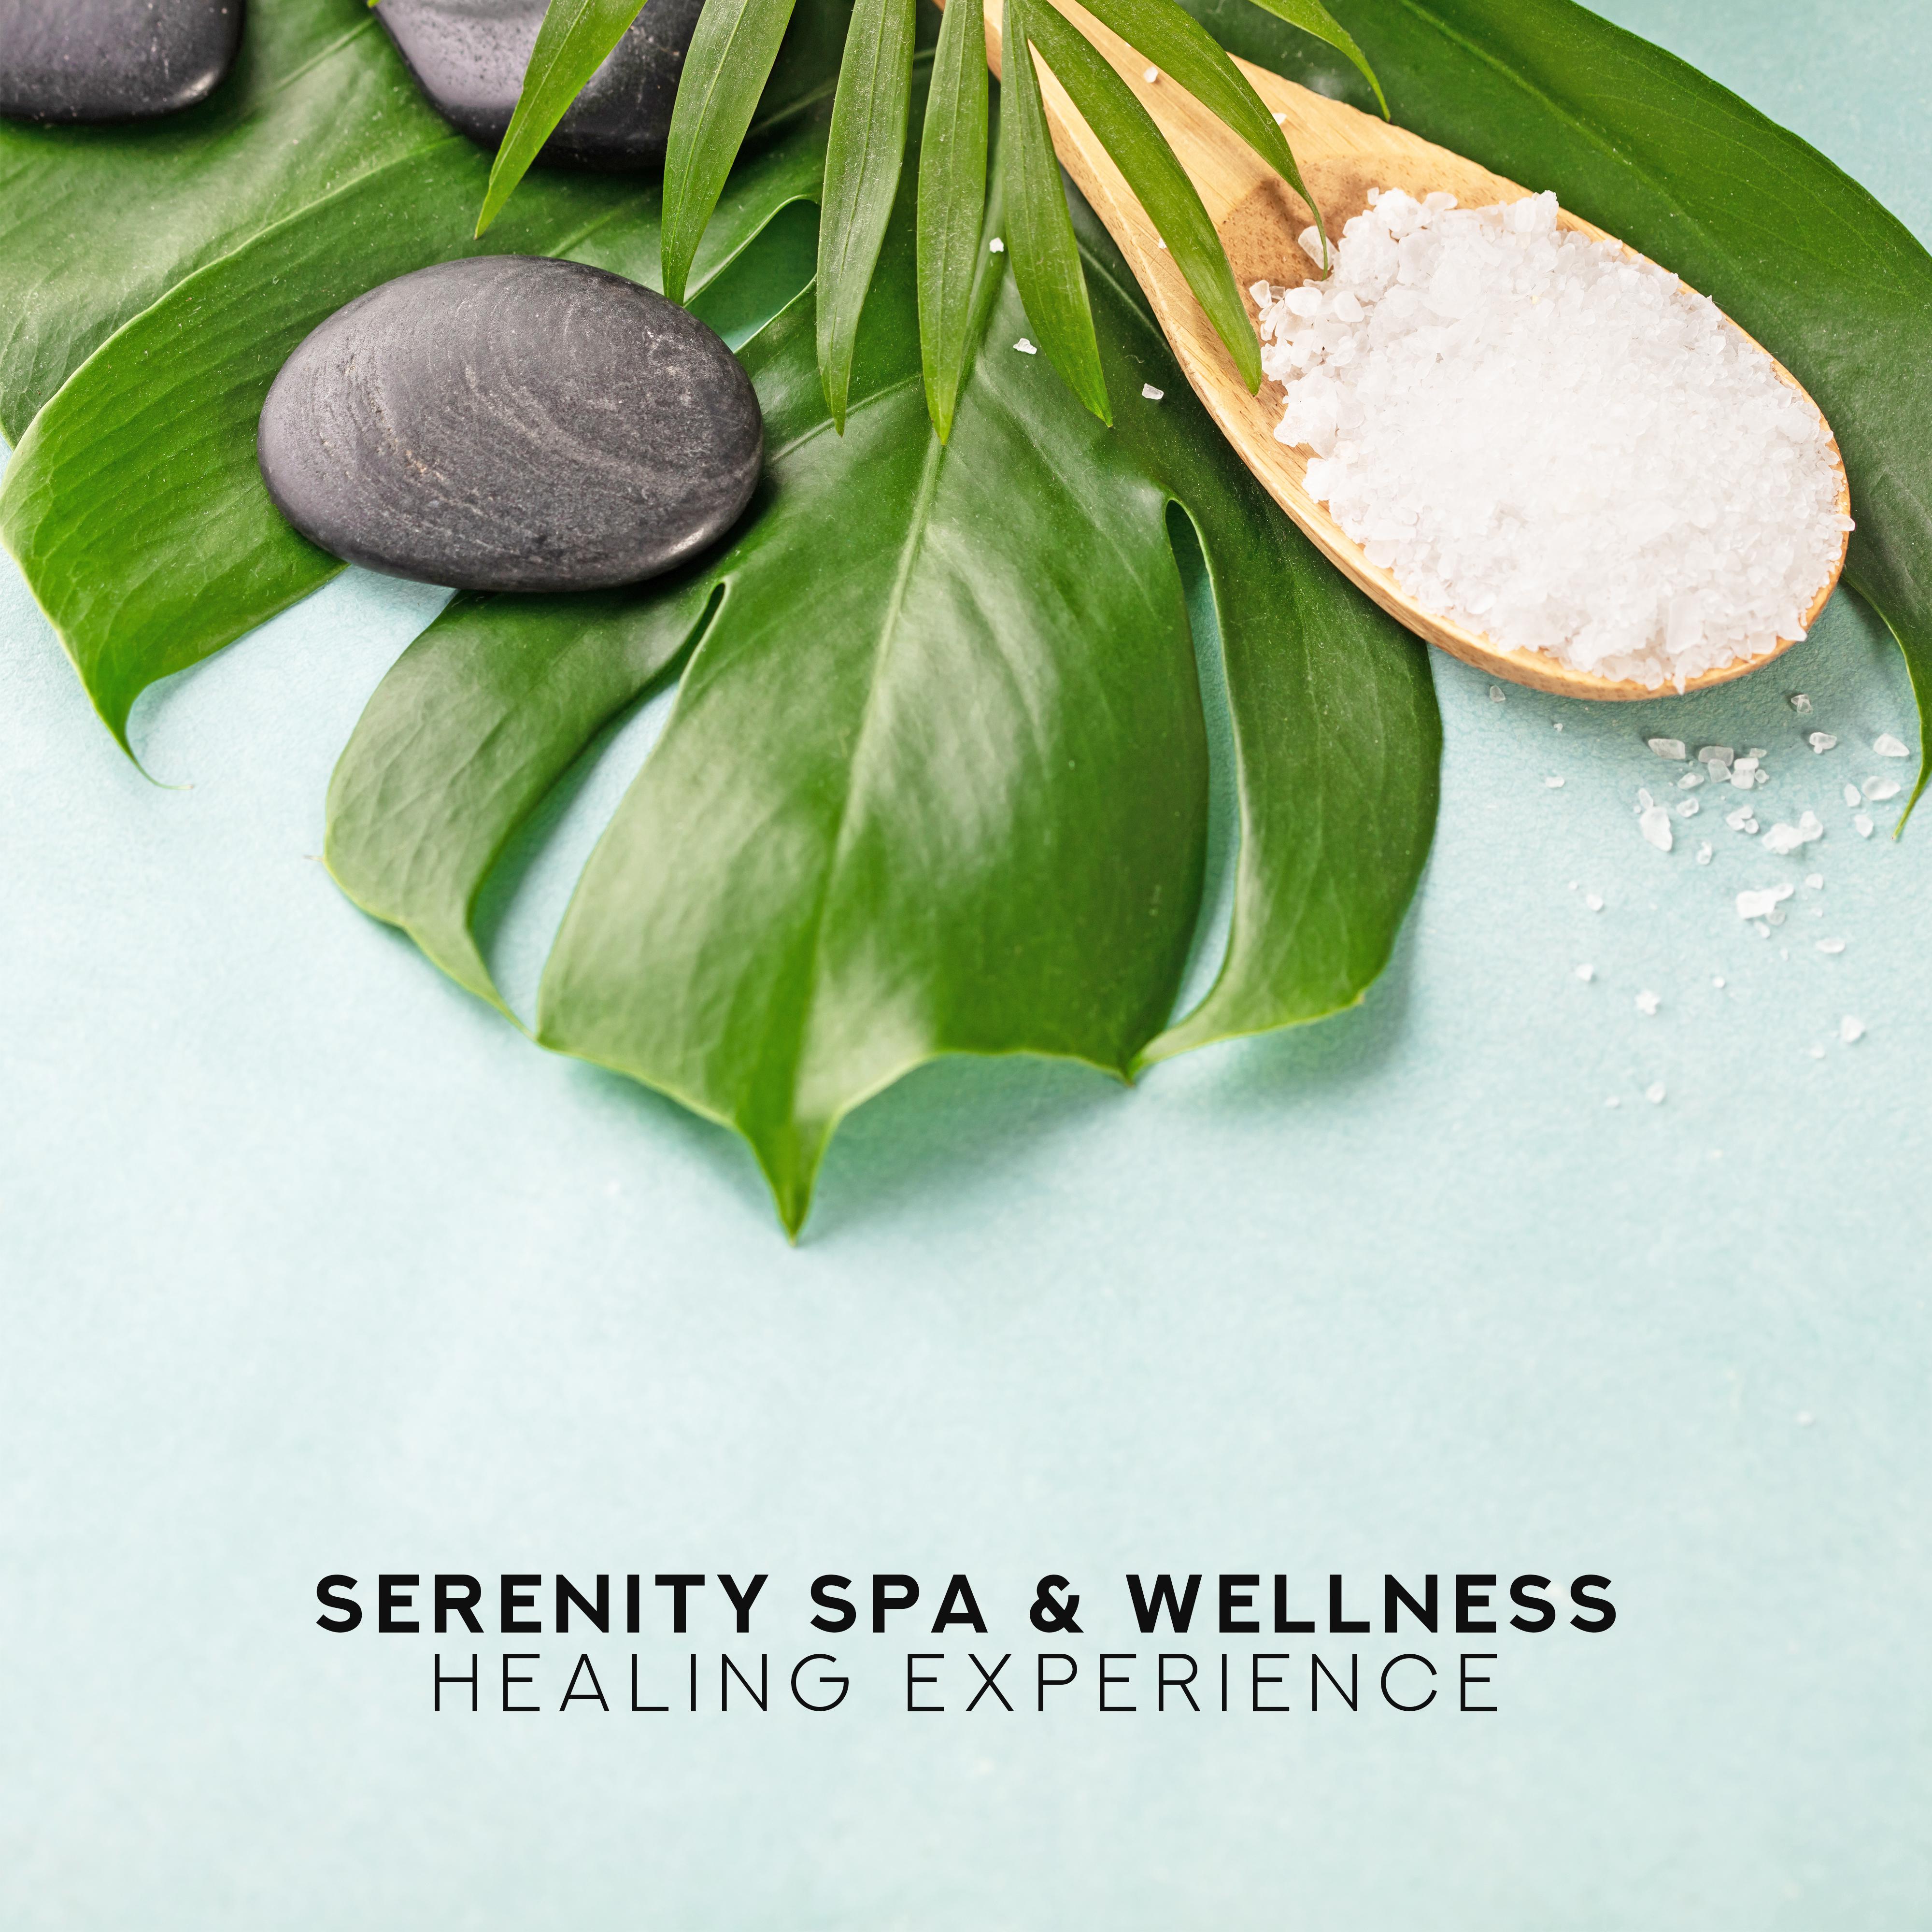 Serenity Spa & Wellness Healing Experience: New Age Background Music for Perfect Massage Therapy Time, Relaxing Sounds of Nature, Soft Water Melodies